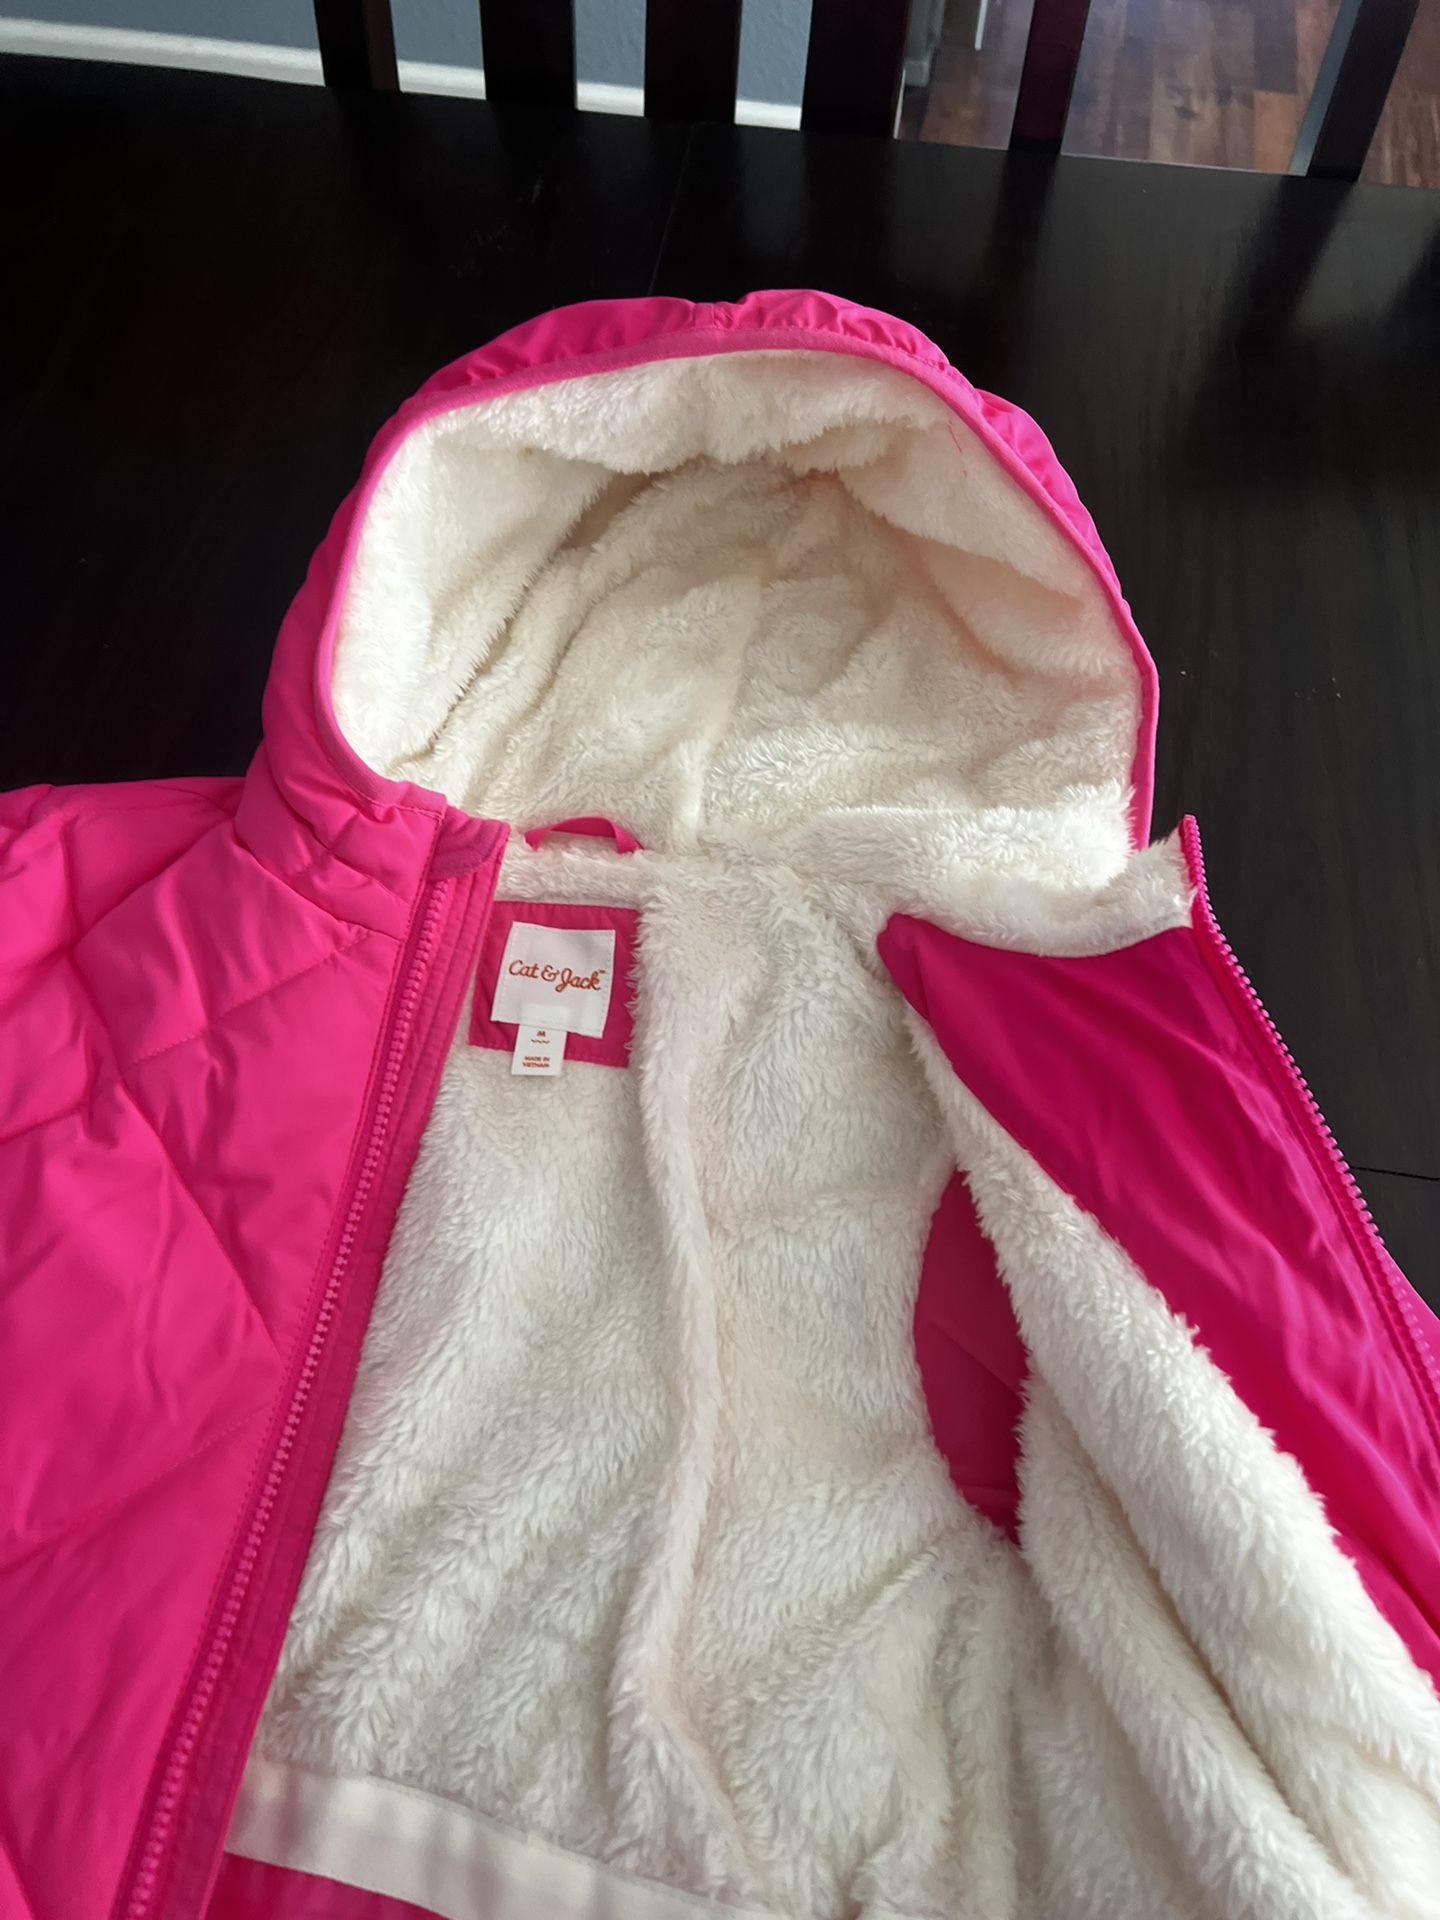 New Winter Jacket For Girls Size 6-8… $25 Dls.